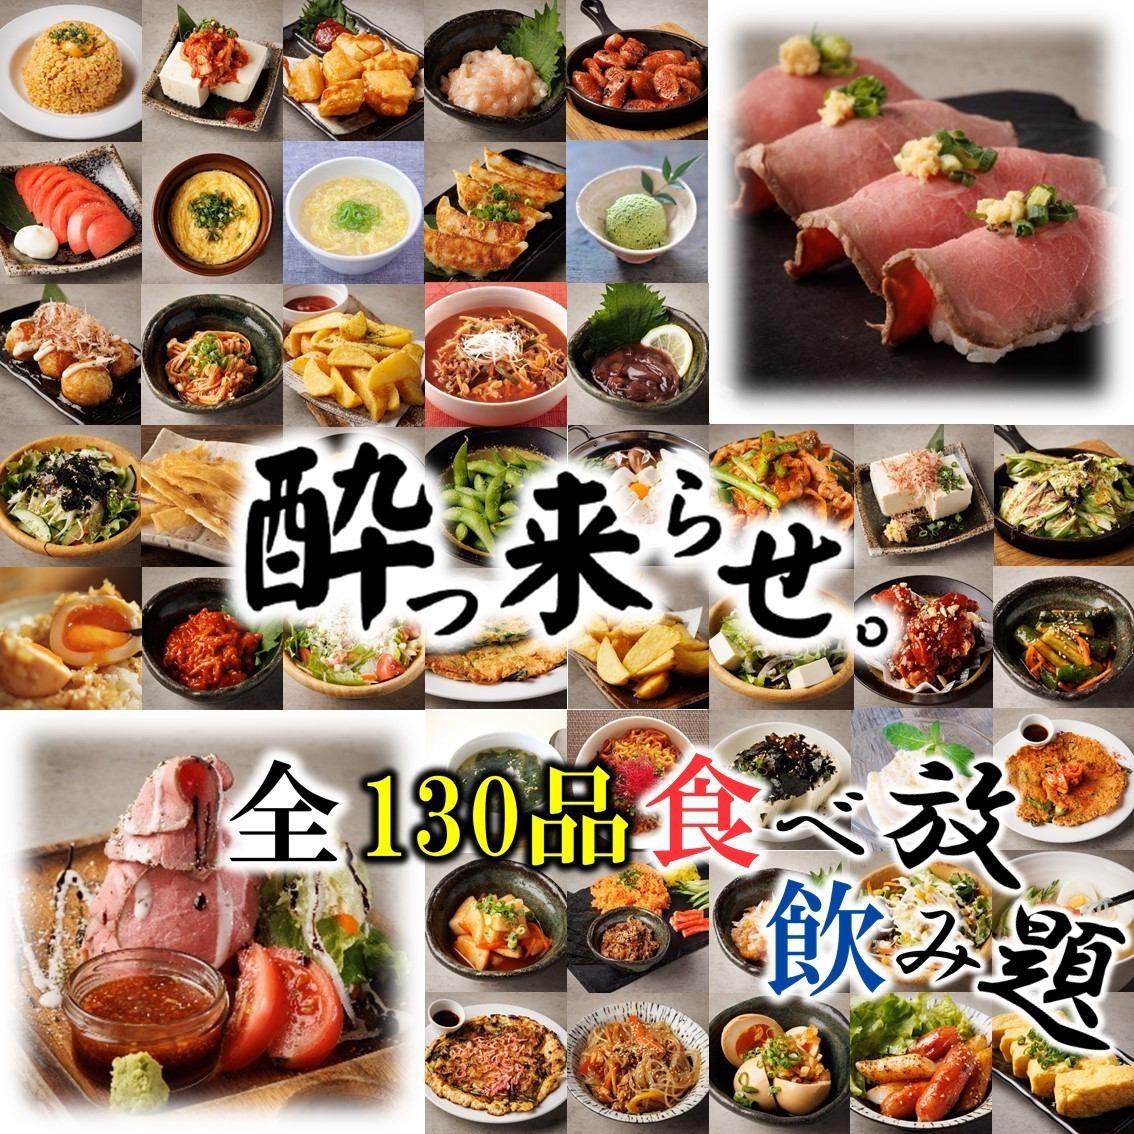 The most cost-effective izakaya where you can enjoy all-you-can-eat and drink meat sushi and roast beef in Kawagoe is open ☆